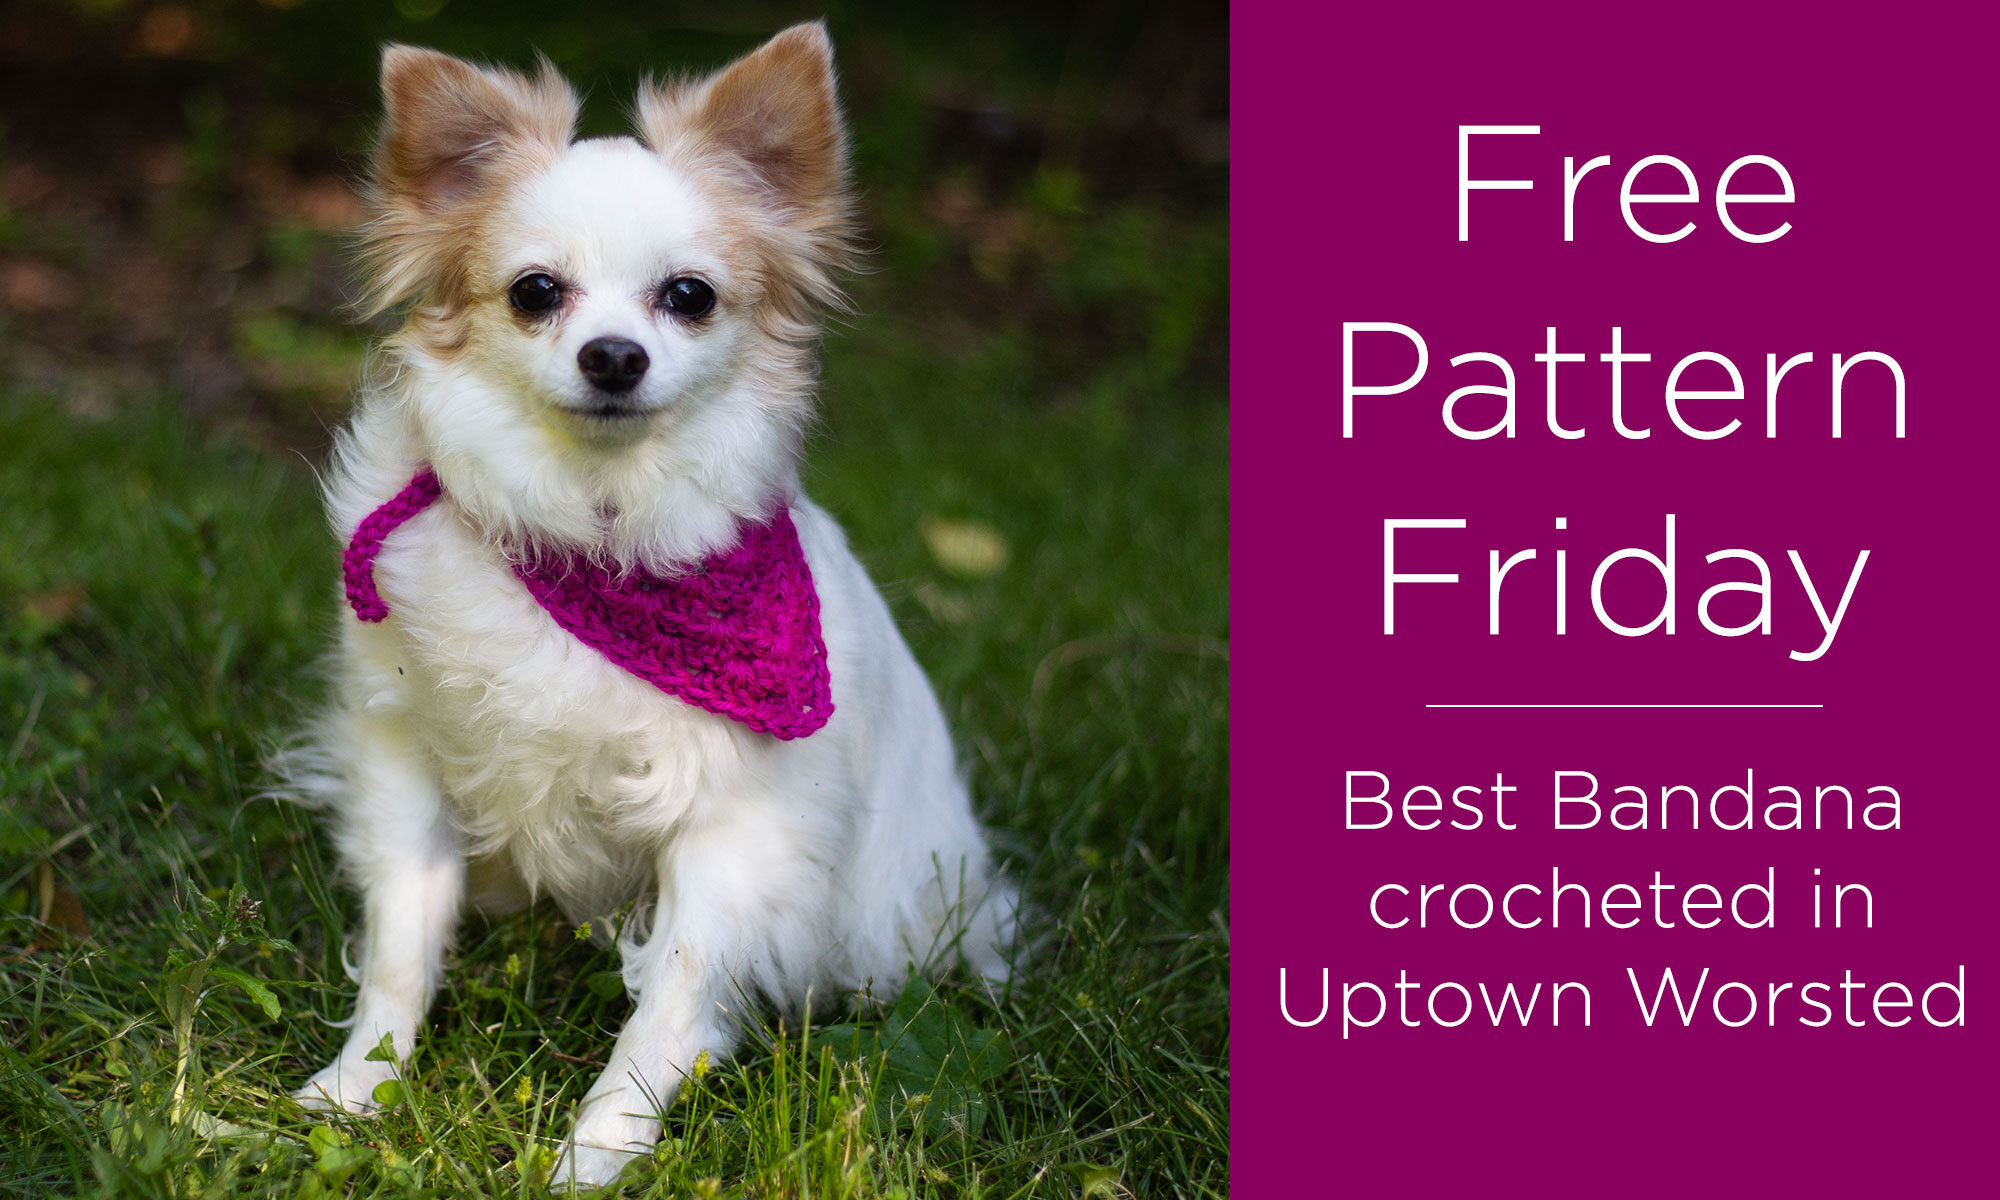 Photo of a dog wearing the Best Bandana with text "Free Pattern Friday - Best Bandana crocheted in Uptown Worsted"